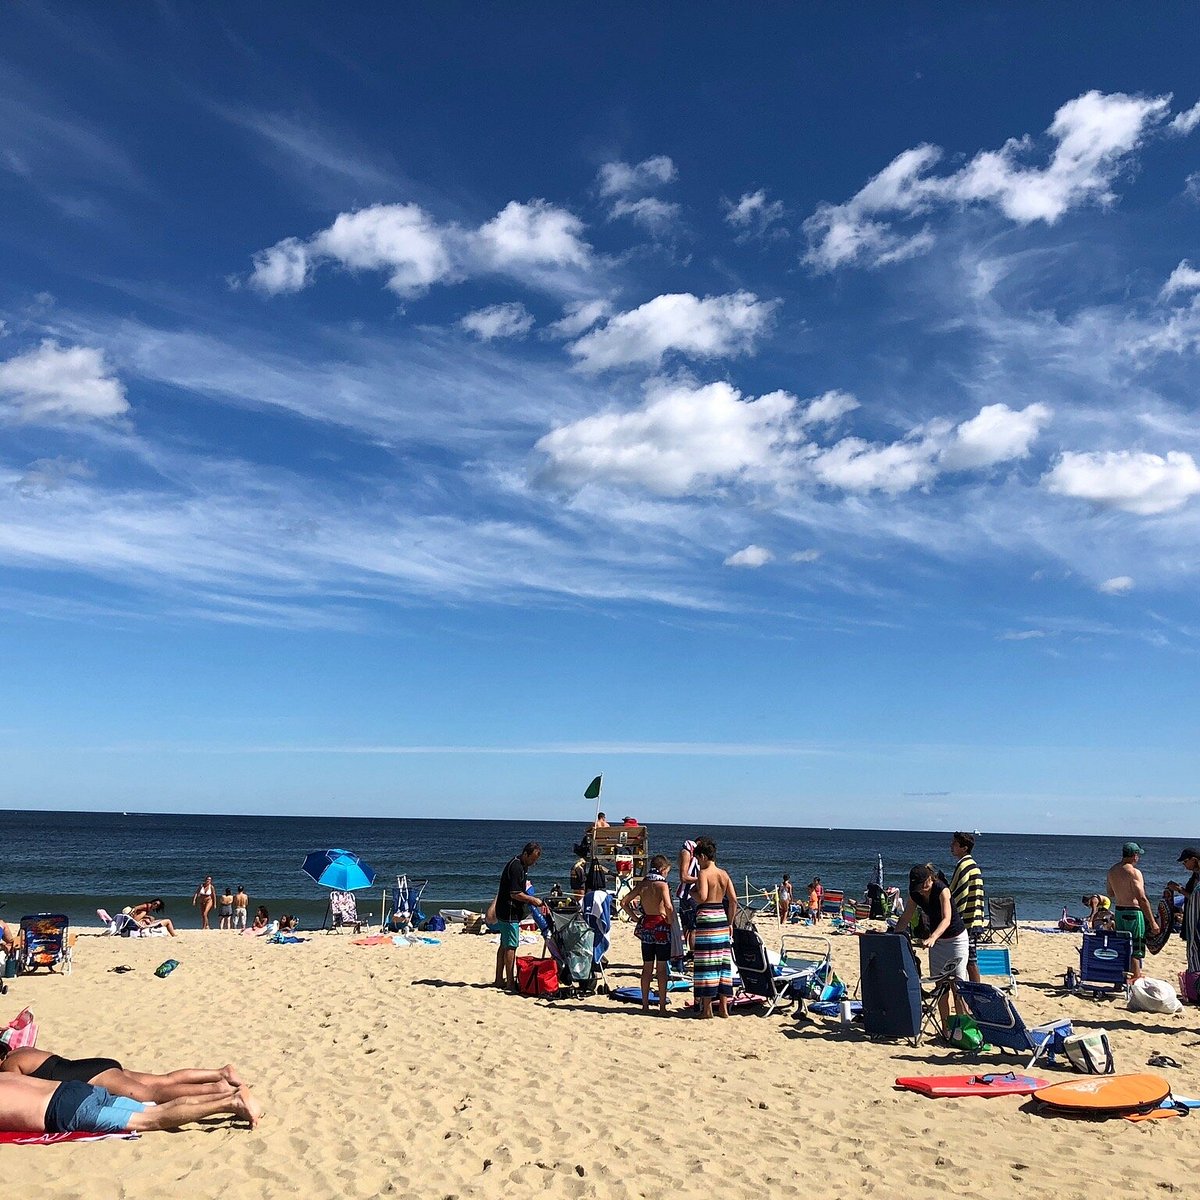 LONG BRANCH BEACH & BOARDWALK: All You Need to Know BEFORE You Go